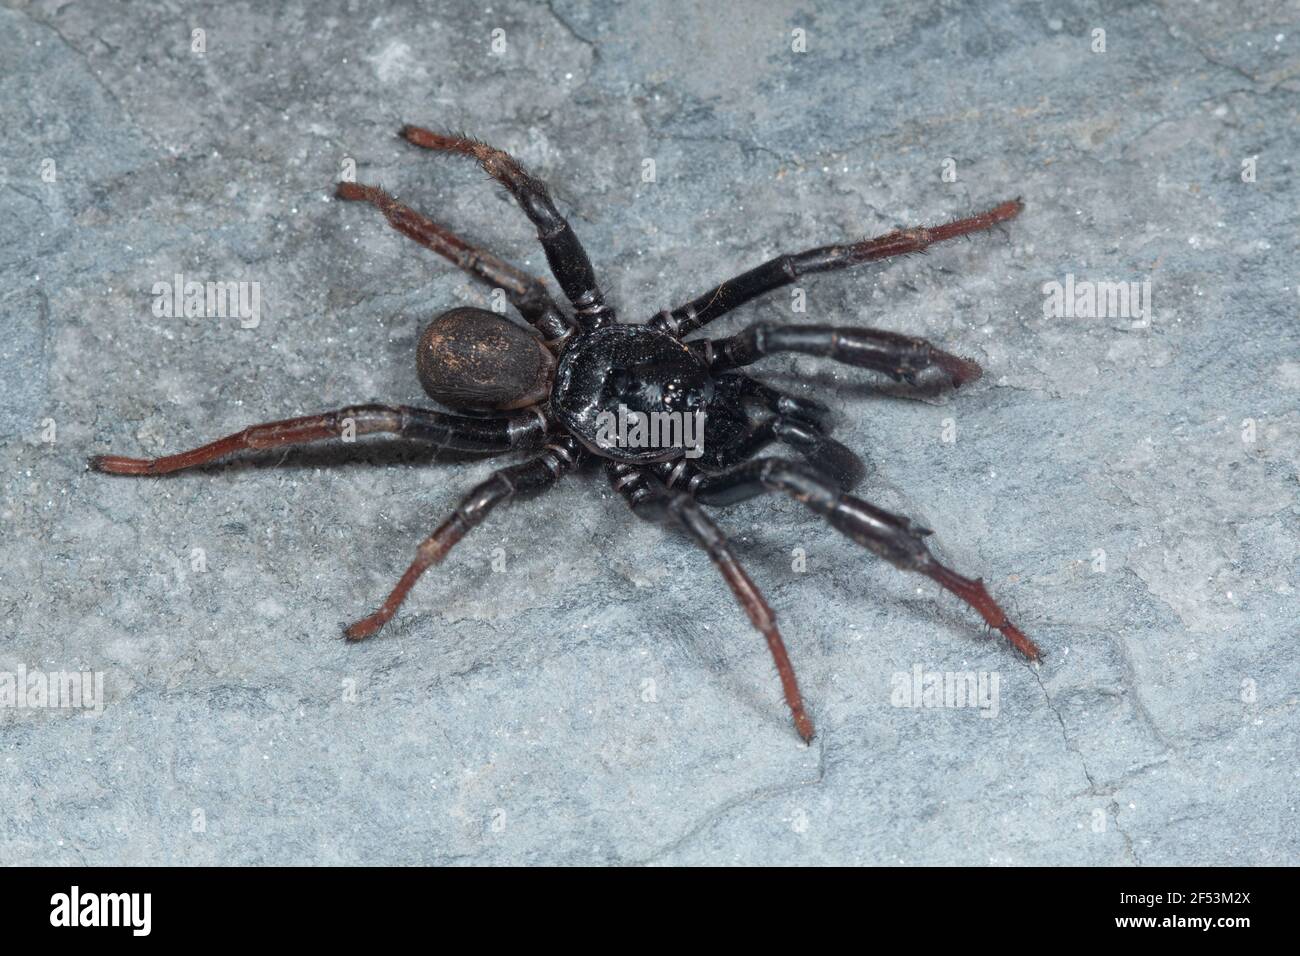 Trapdoor spider male of the genus Idiops. These spiders make a trap-door to their burrow entrance. Stock Photo